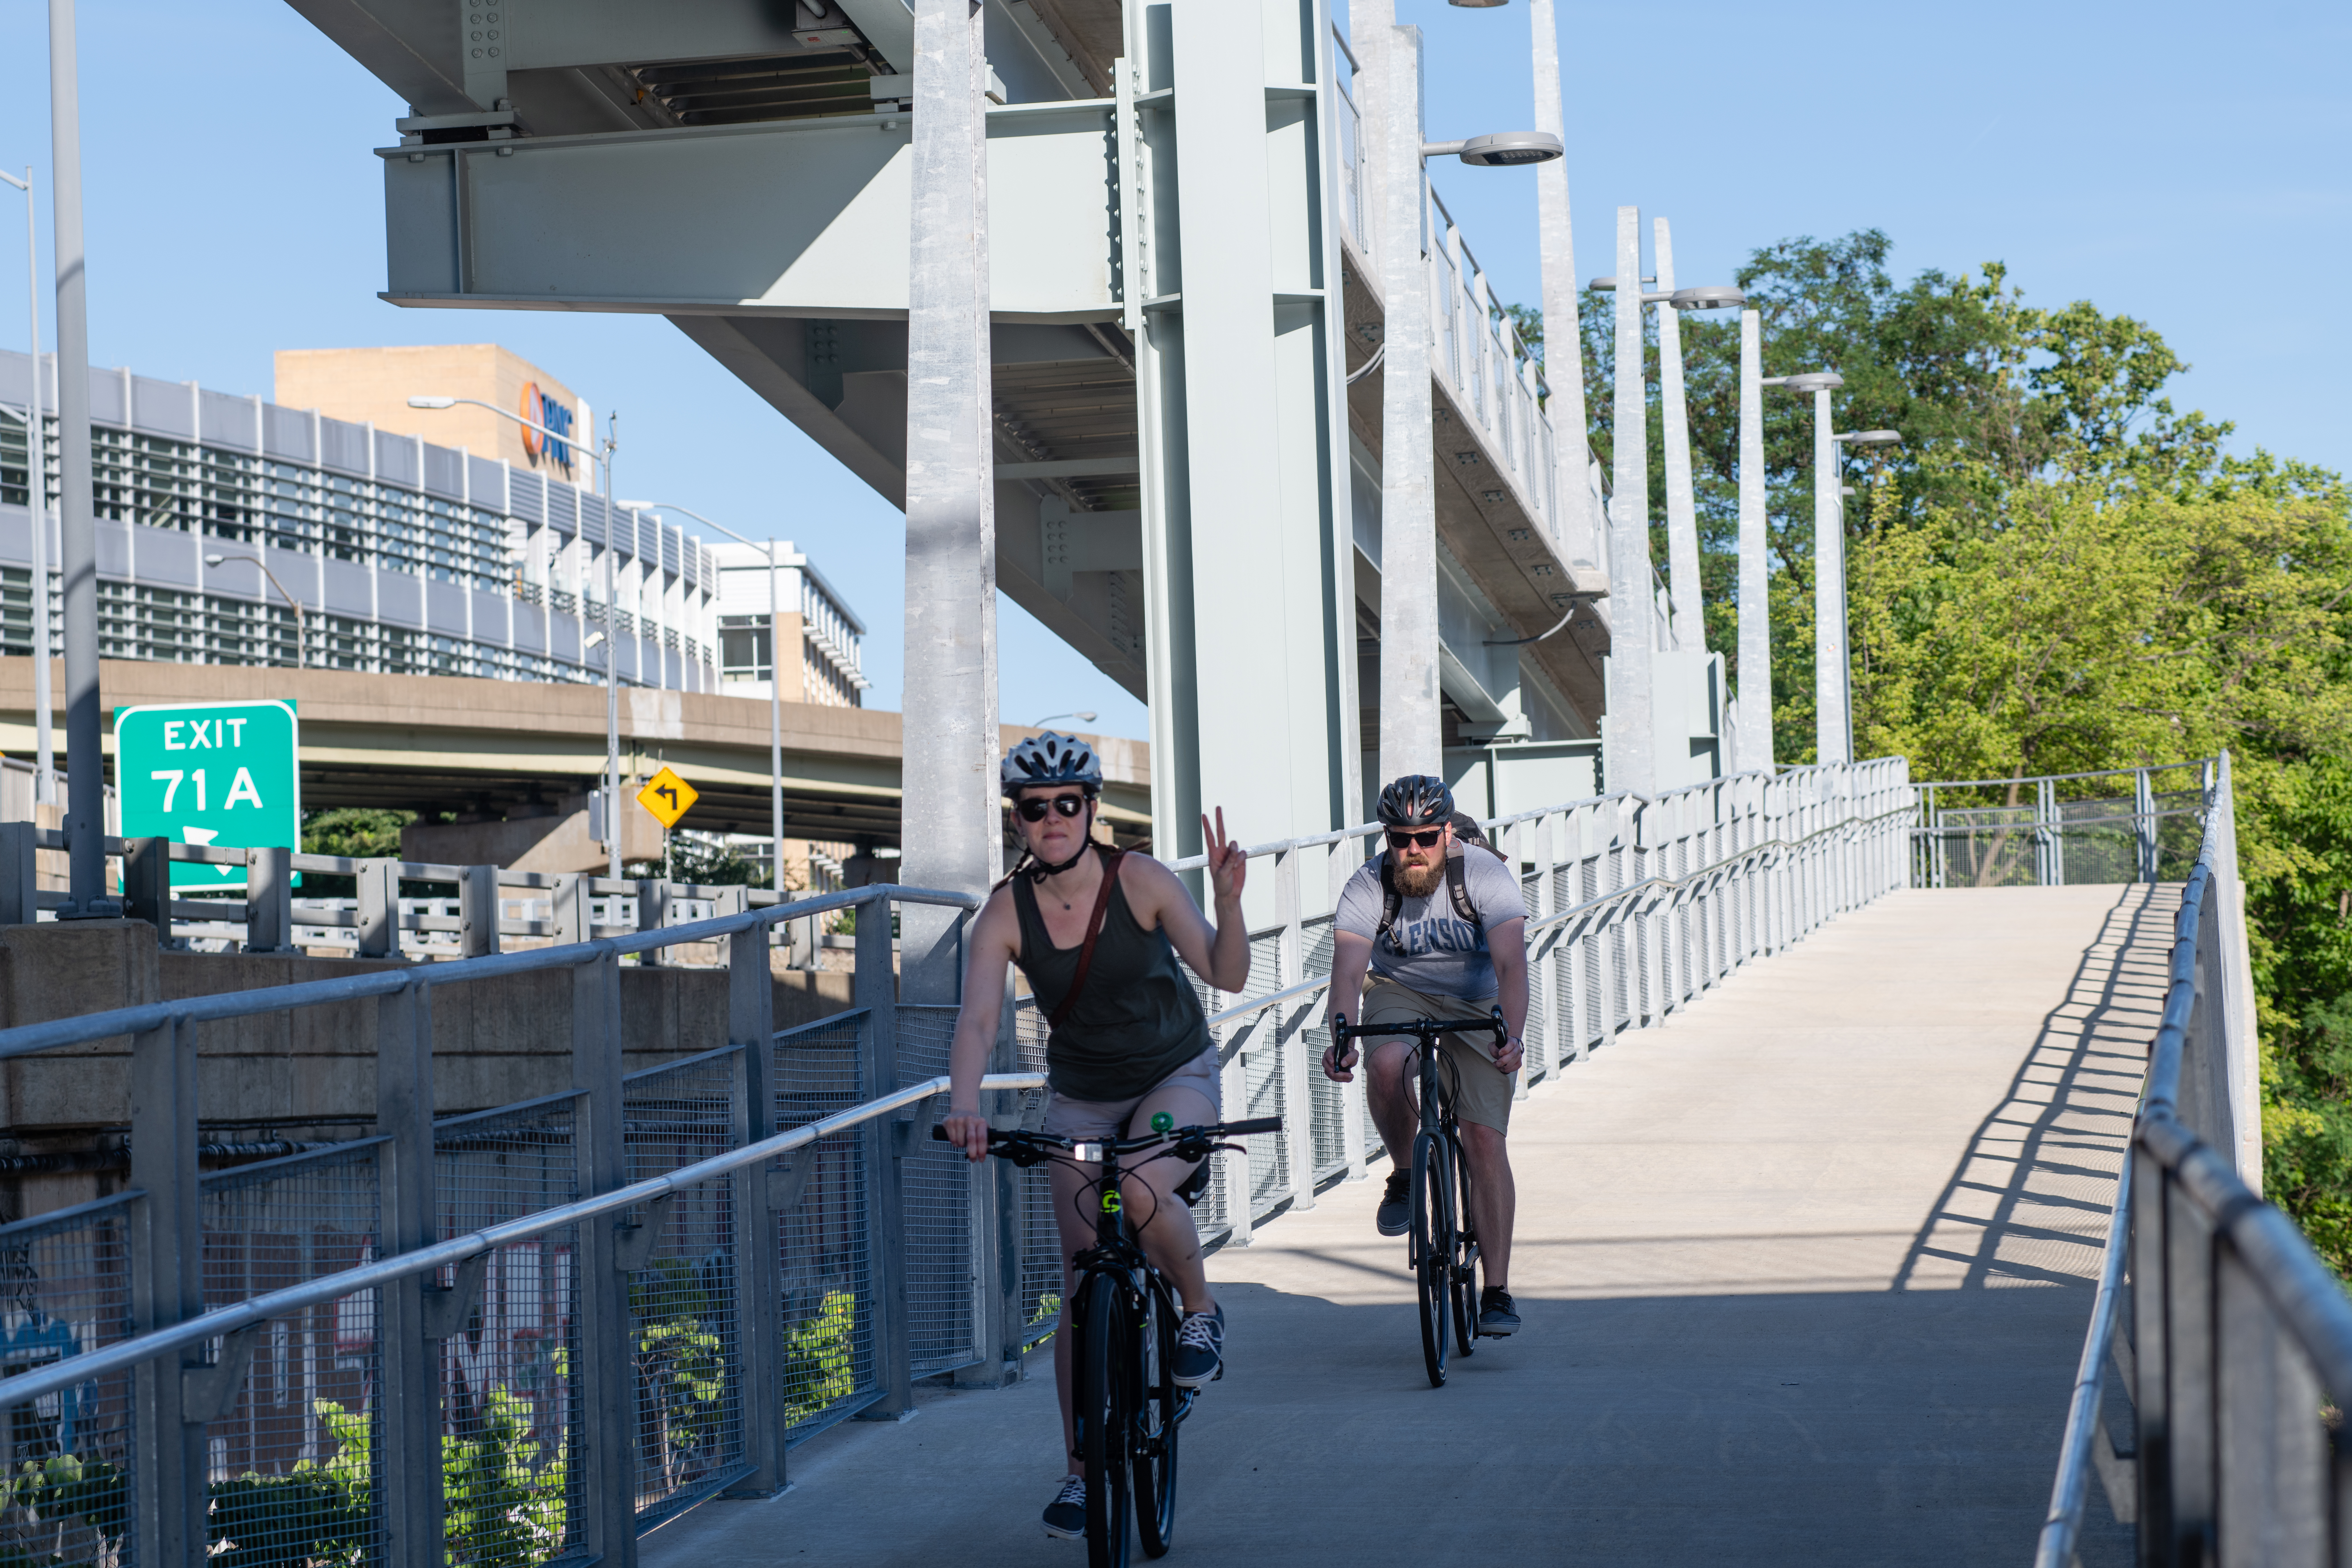 Mon Wharf Switchback ramp shown with two descending bicycle riders, one of whom is flashing a peace sign